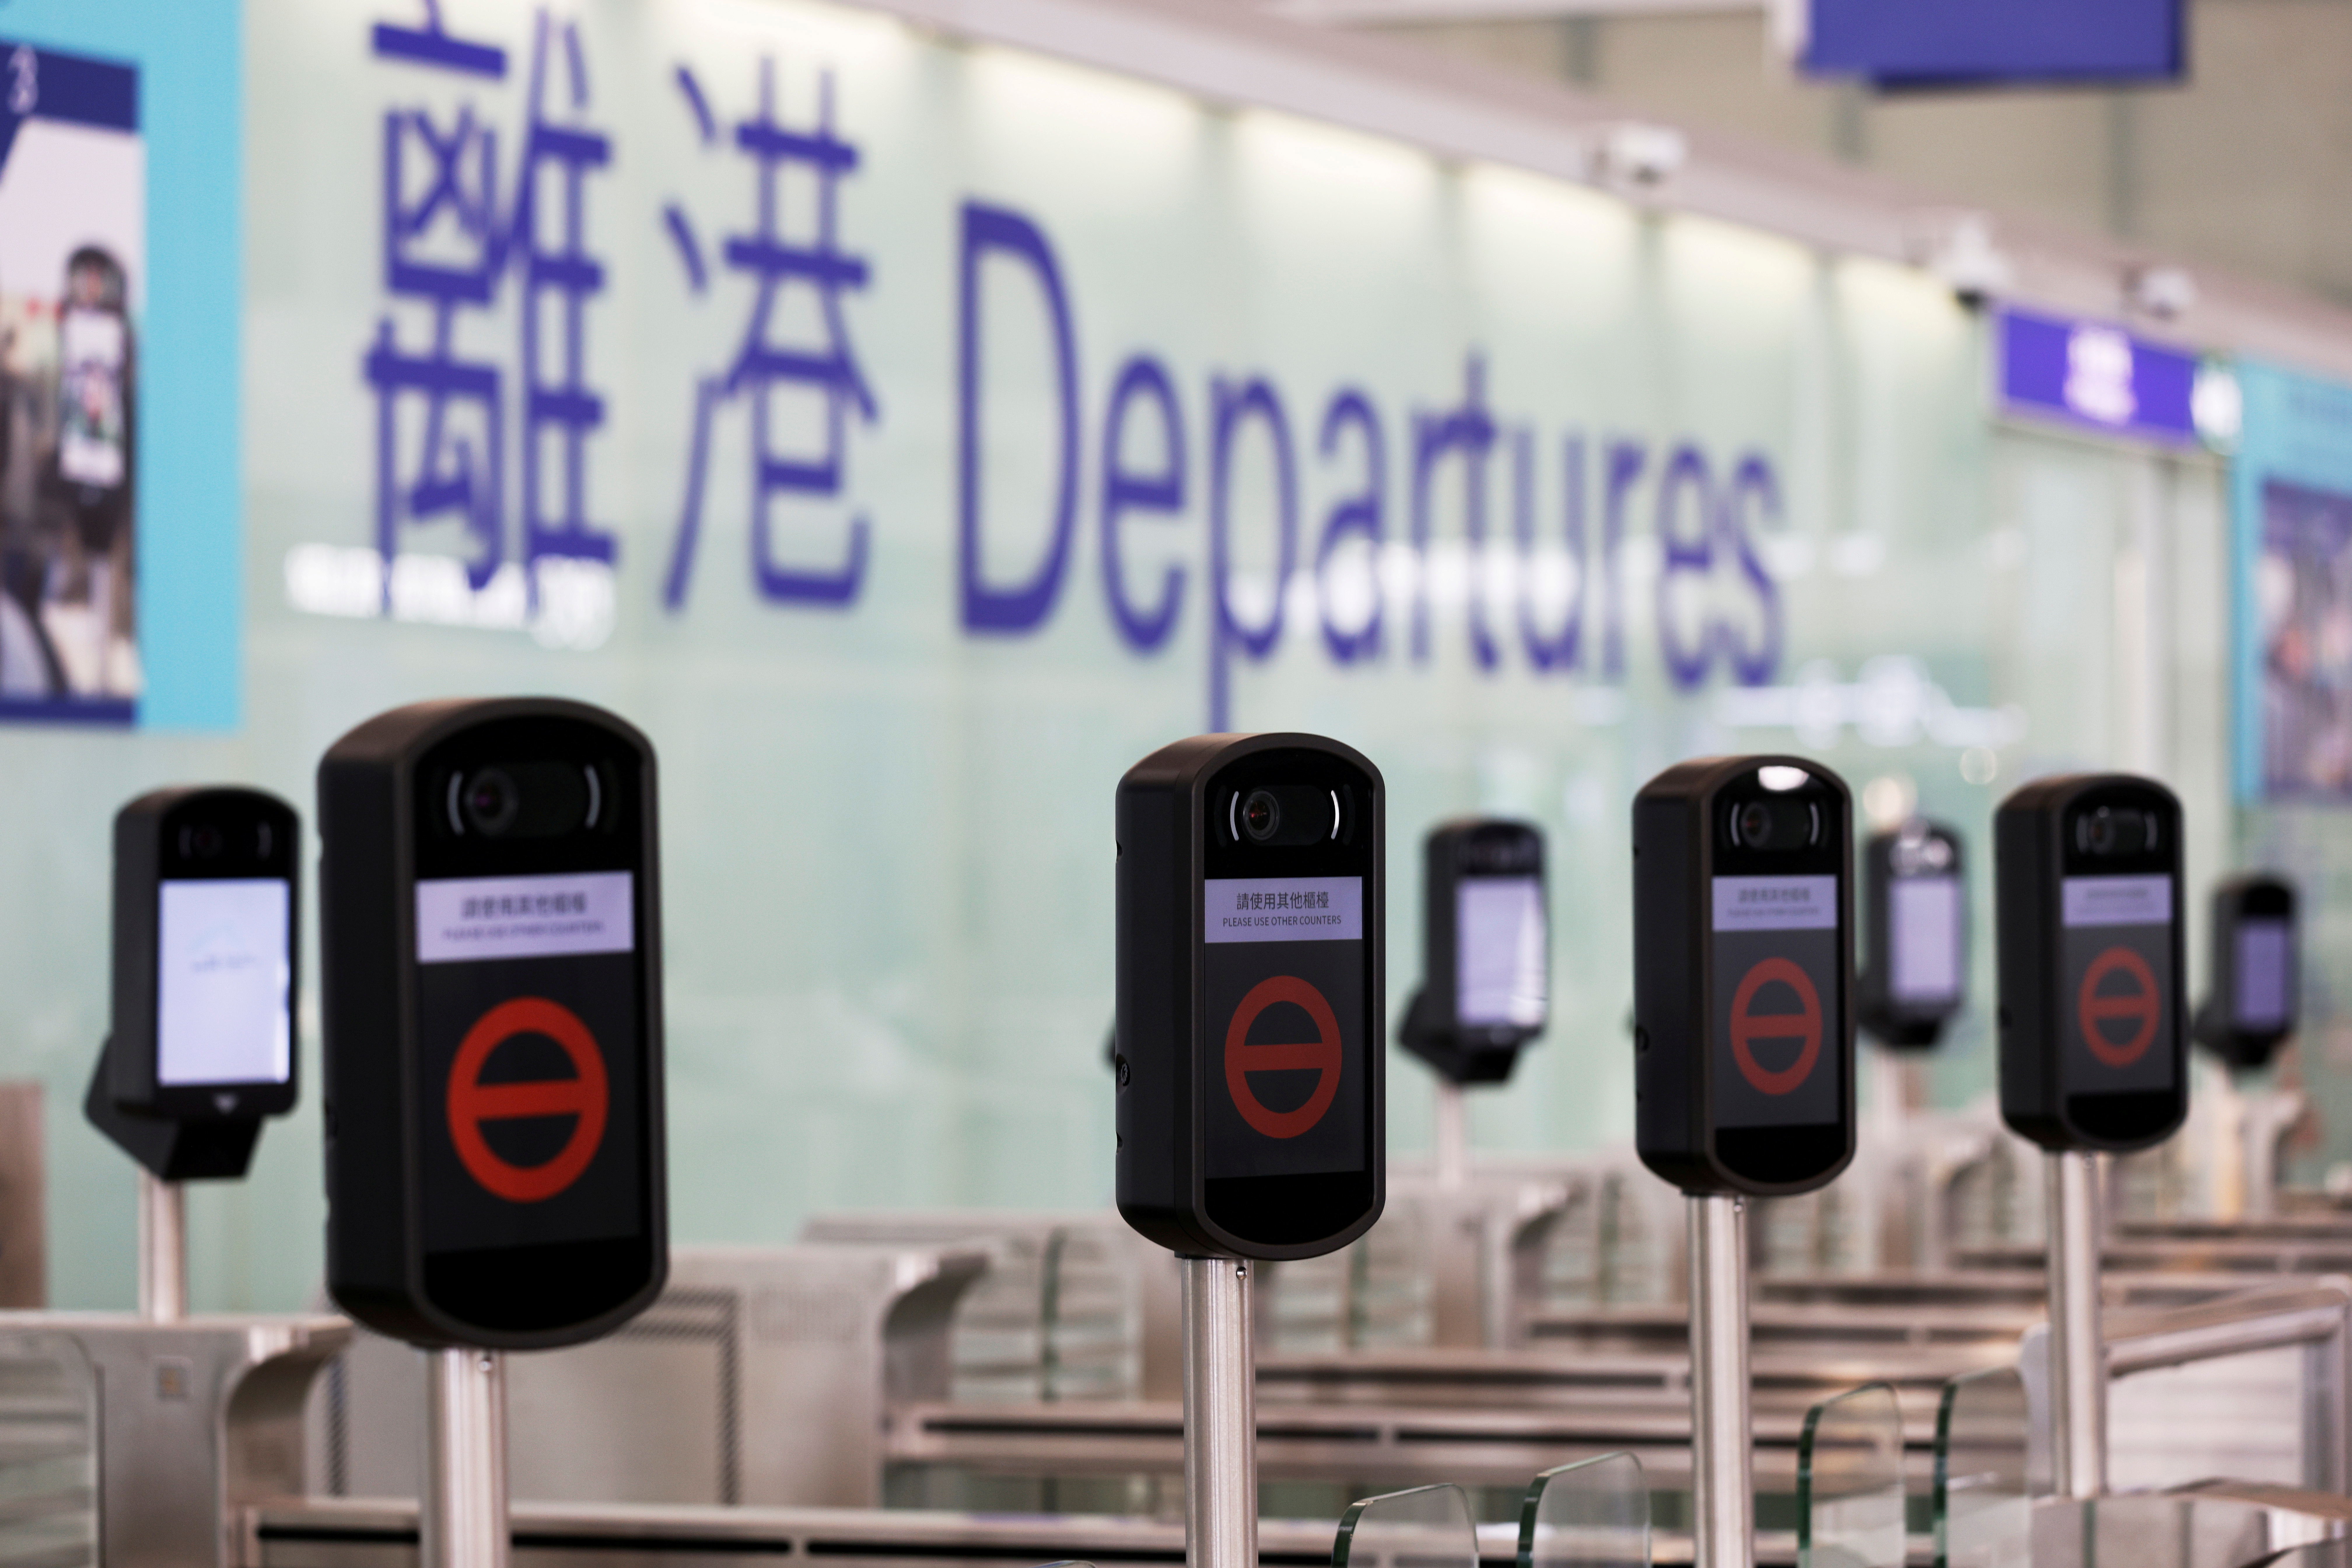 Closed counters are seen at the departures hall of Hong Kong International Airport, following the coronavirus disease (COVID-19) outbreak, in Hong Kong, China